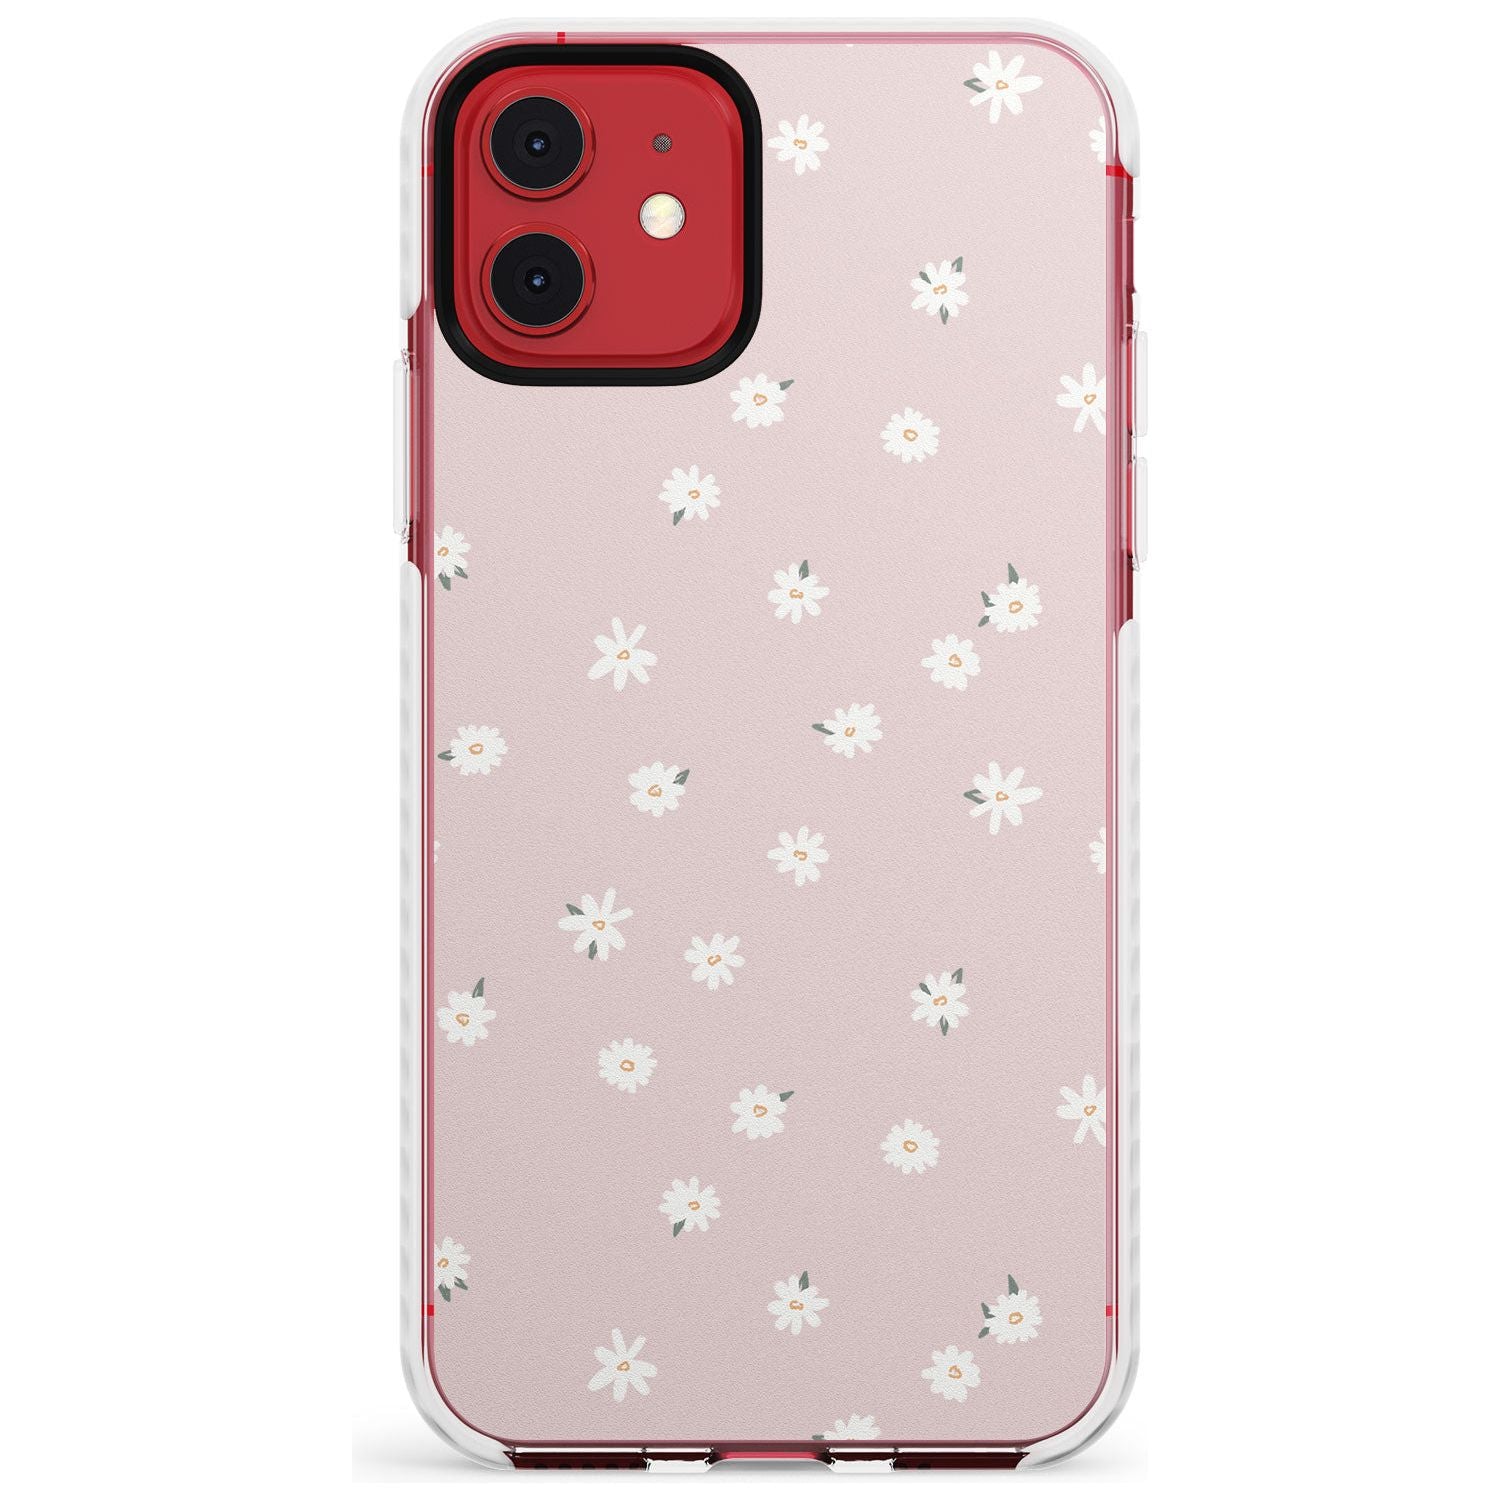 Painted Daises on Pink - Cute Floral Daisy Design Slim TPU Phone Case for iPhone 11